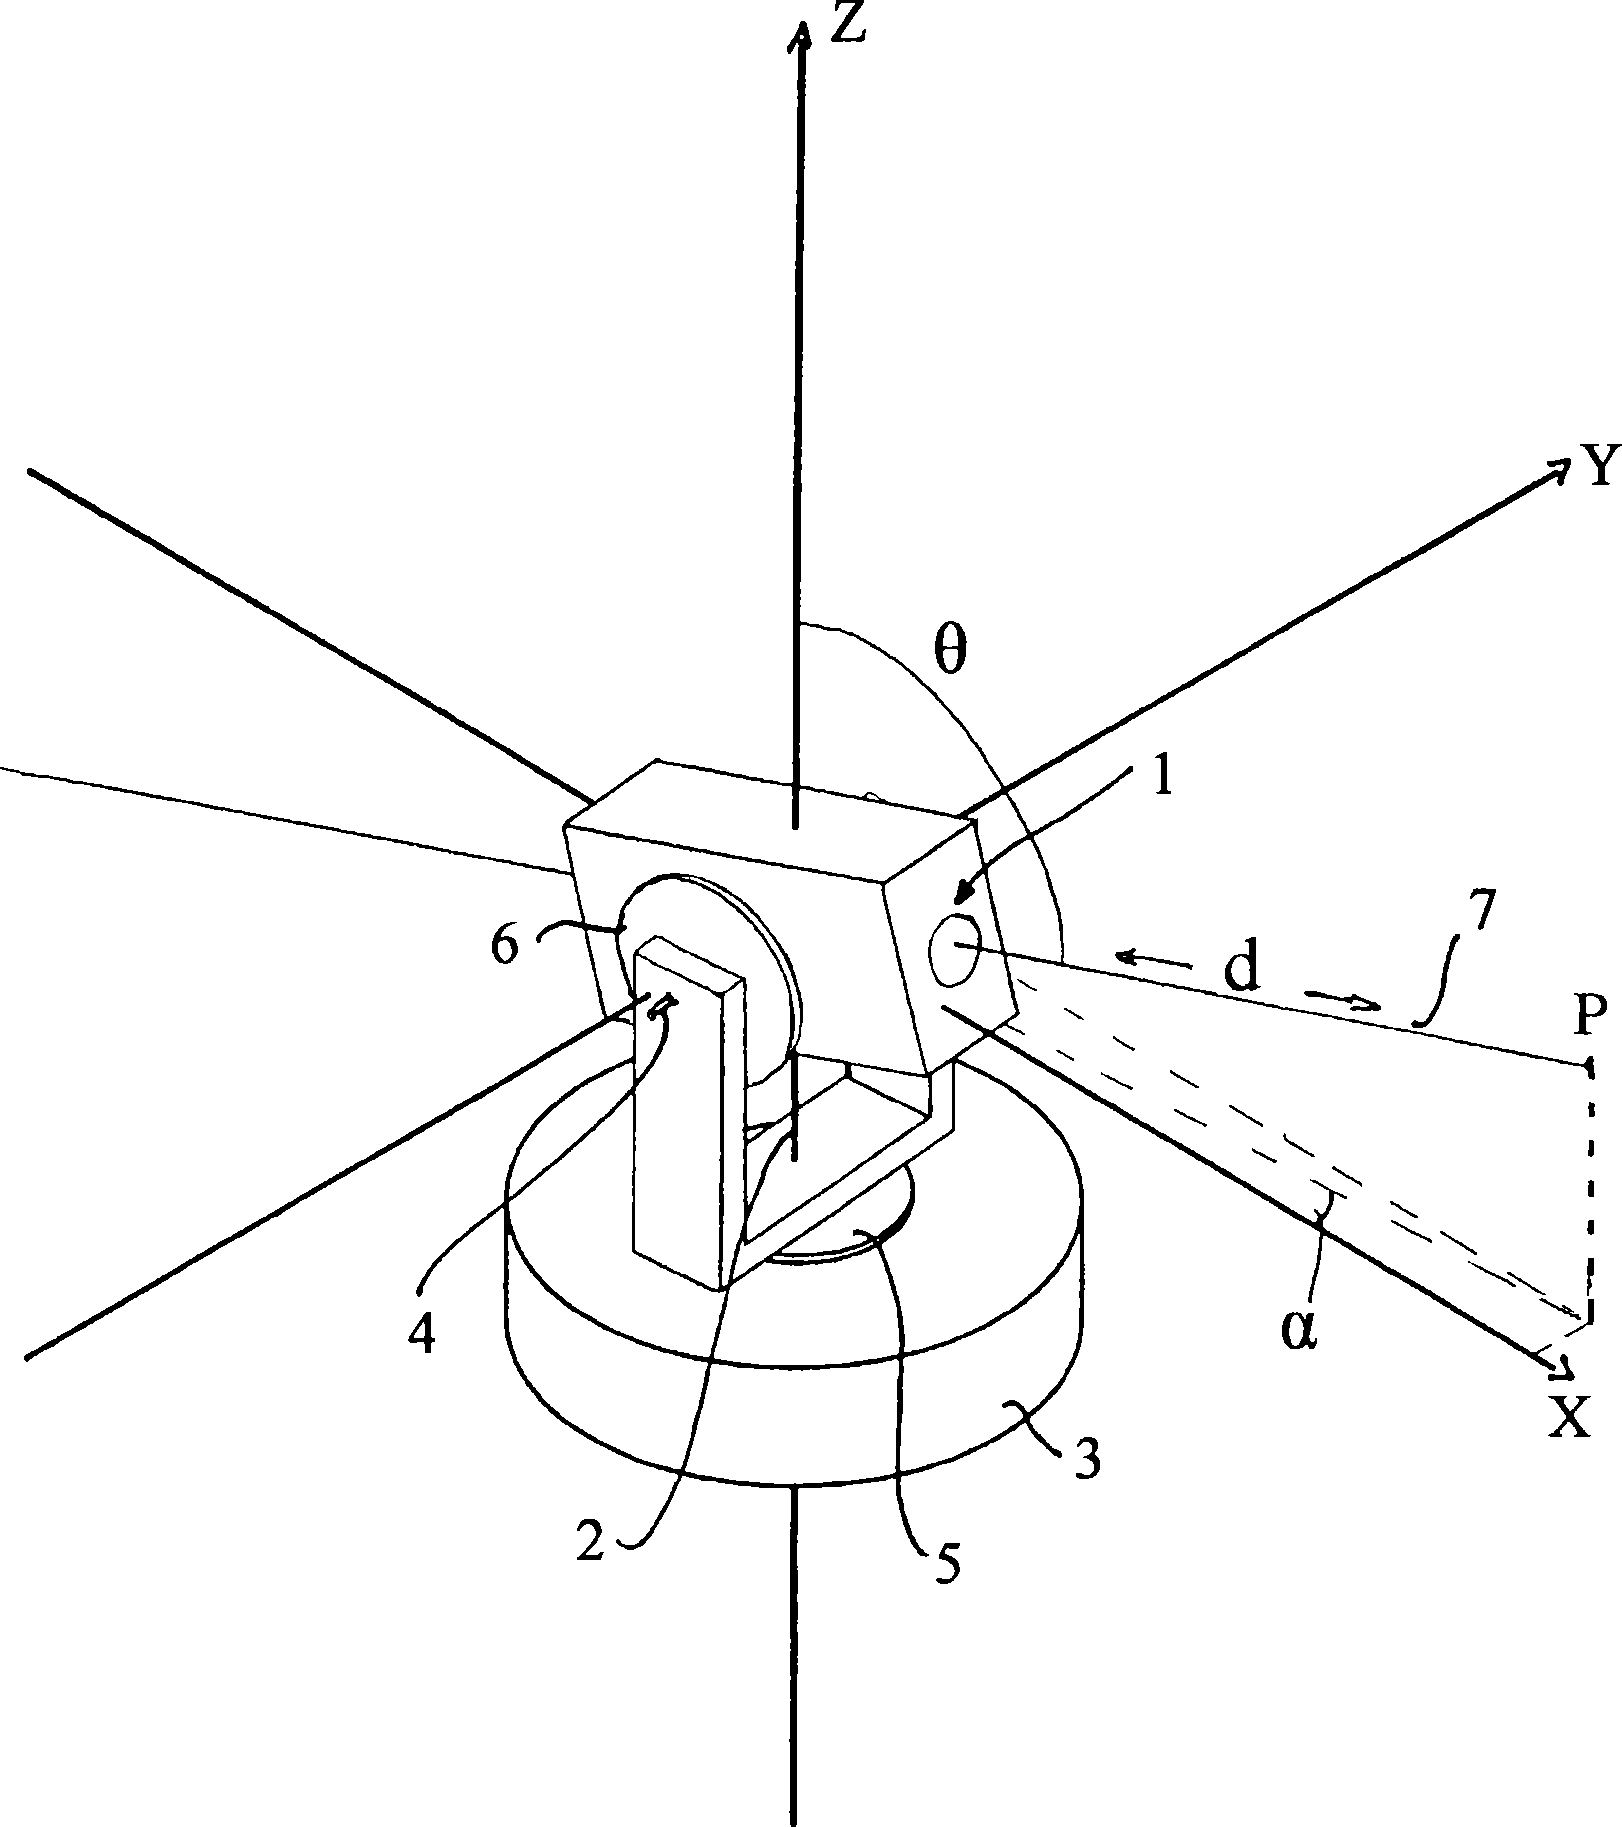 Calibration of a surveying instrument